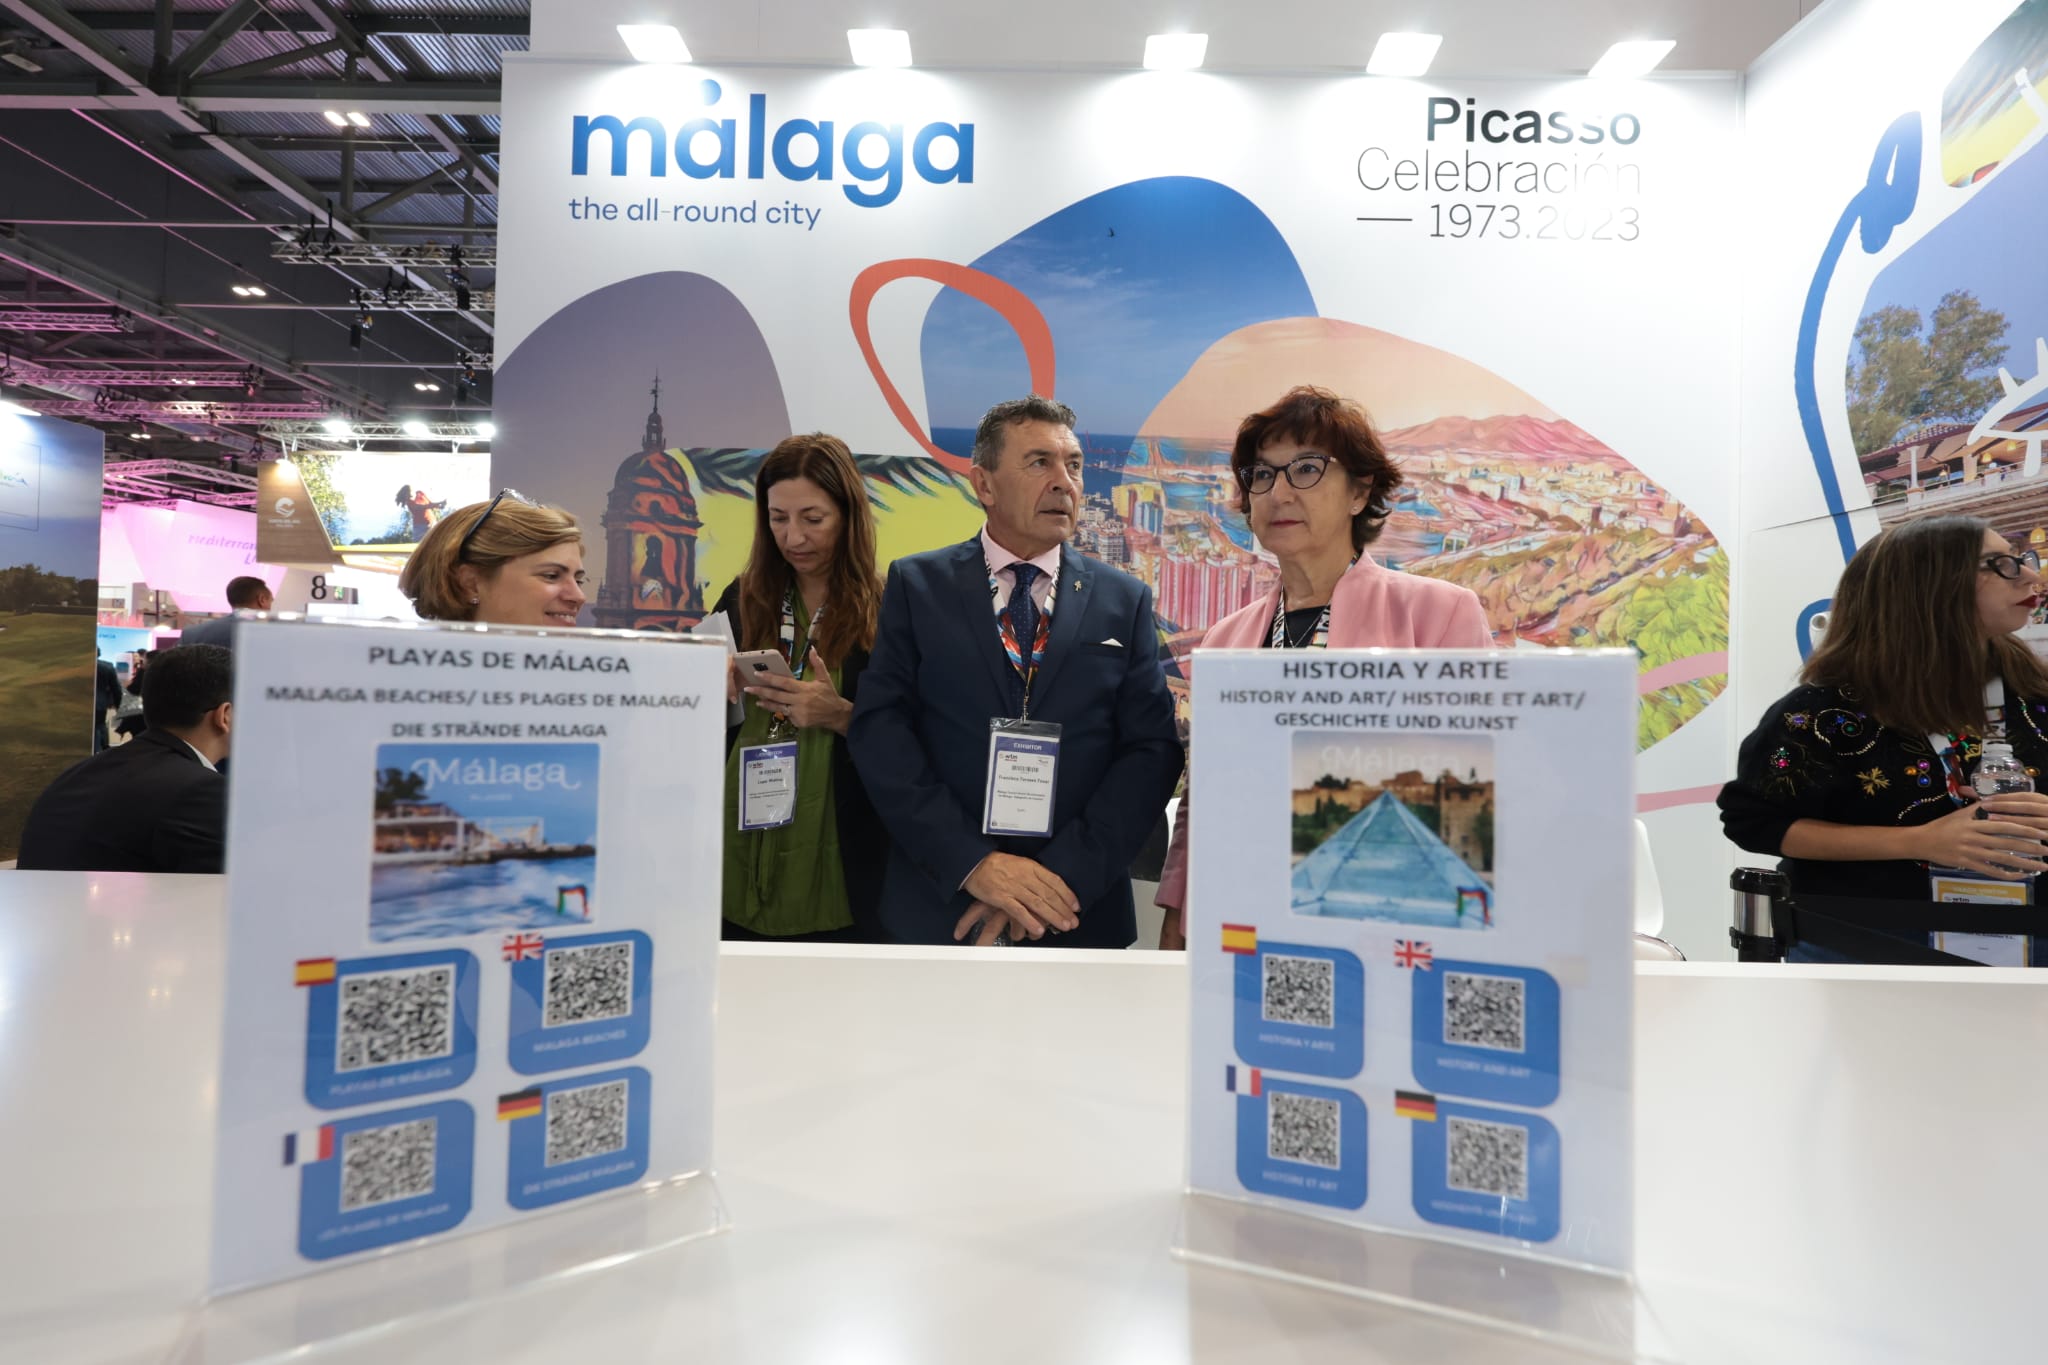 Andalucía, the Costa del Sol, Malaga and the main tourist resorts of southern Spain are the ExCel centre London this week with one common aim: to make sure 2023 is the year of the total recovery of British tourism